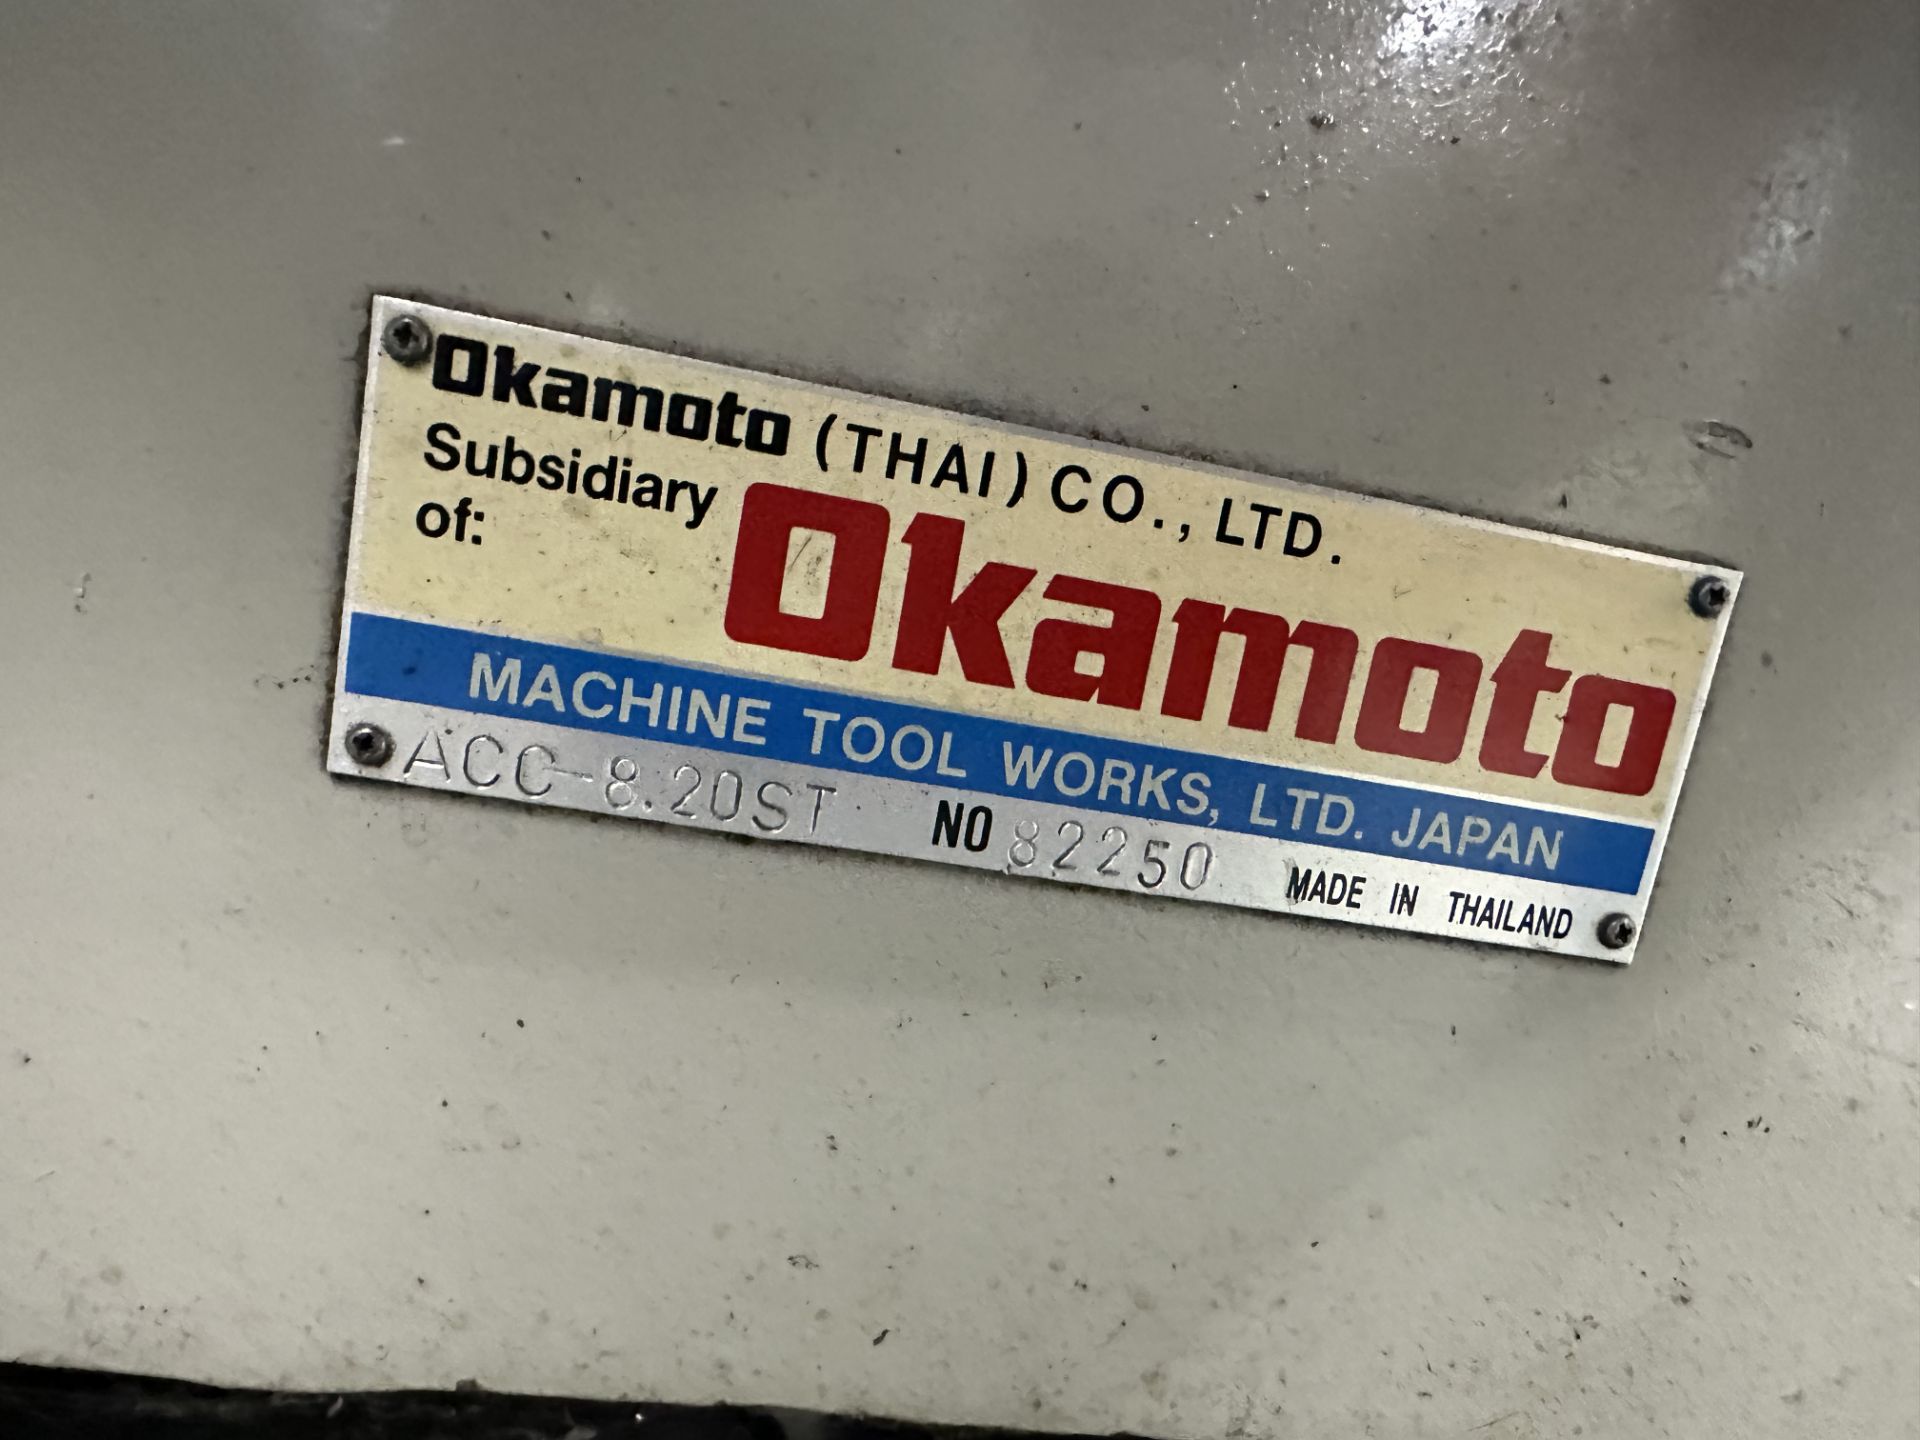 Okamoto Grind X ACC8-20ST Surface Grinder s/n 82250, Sony Read Out - Image 7 of 7